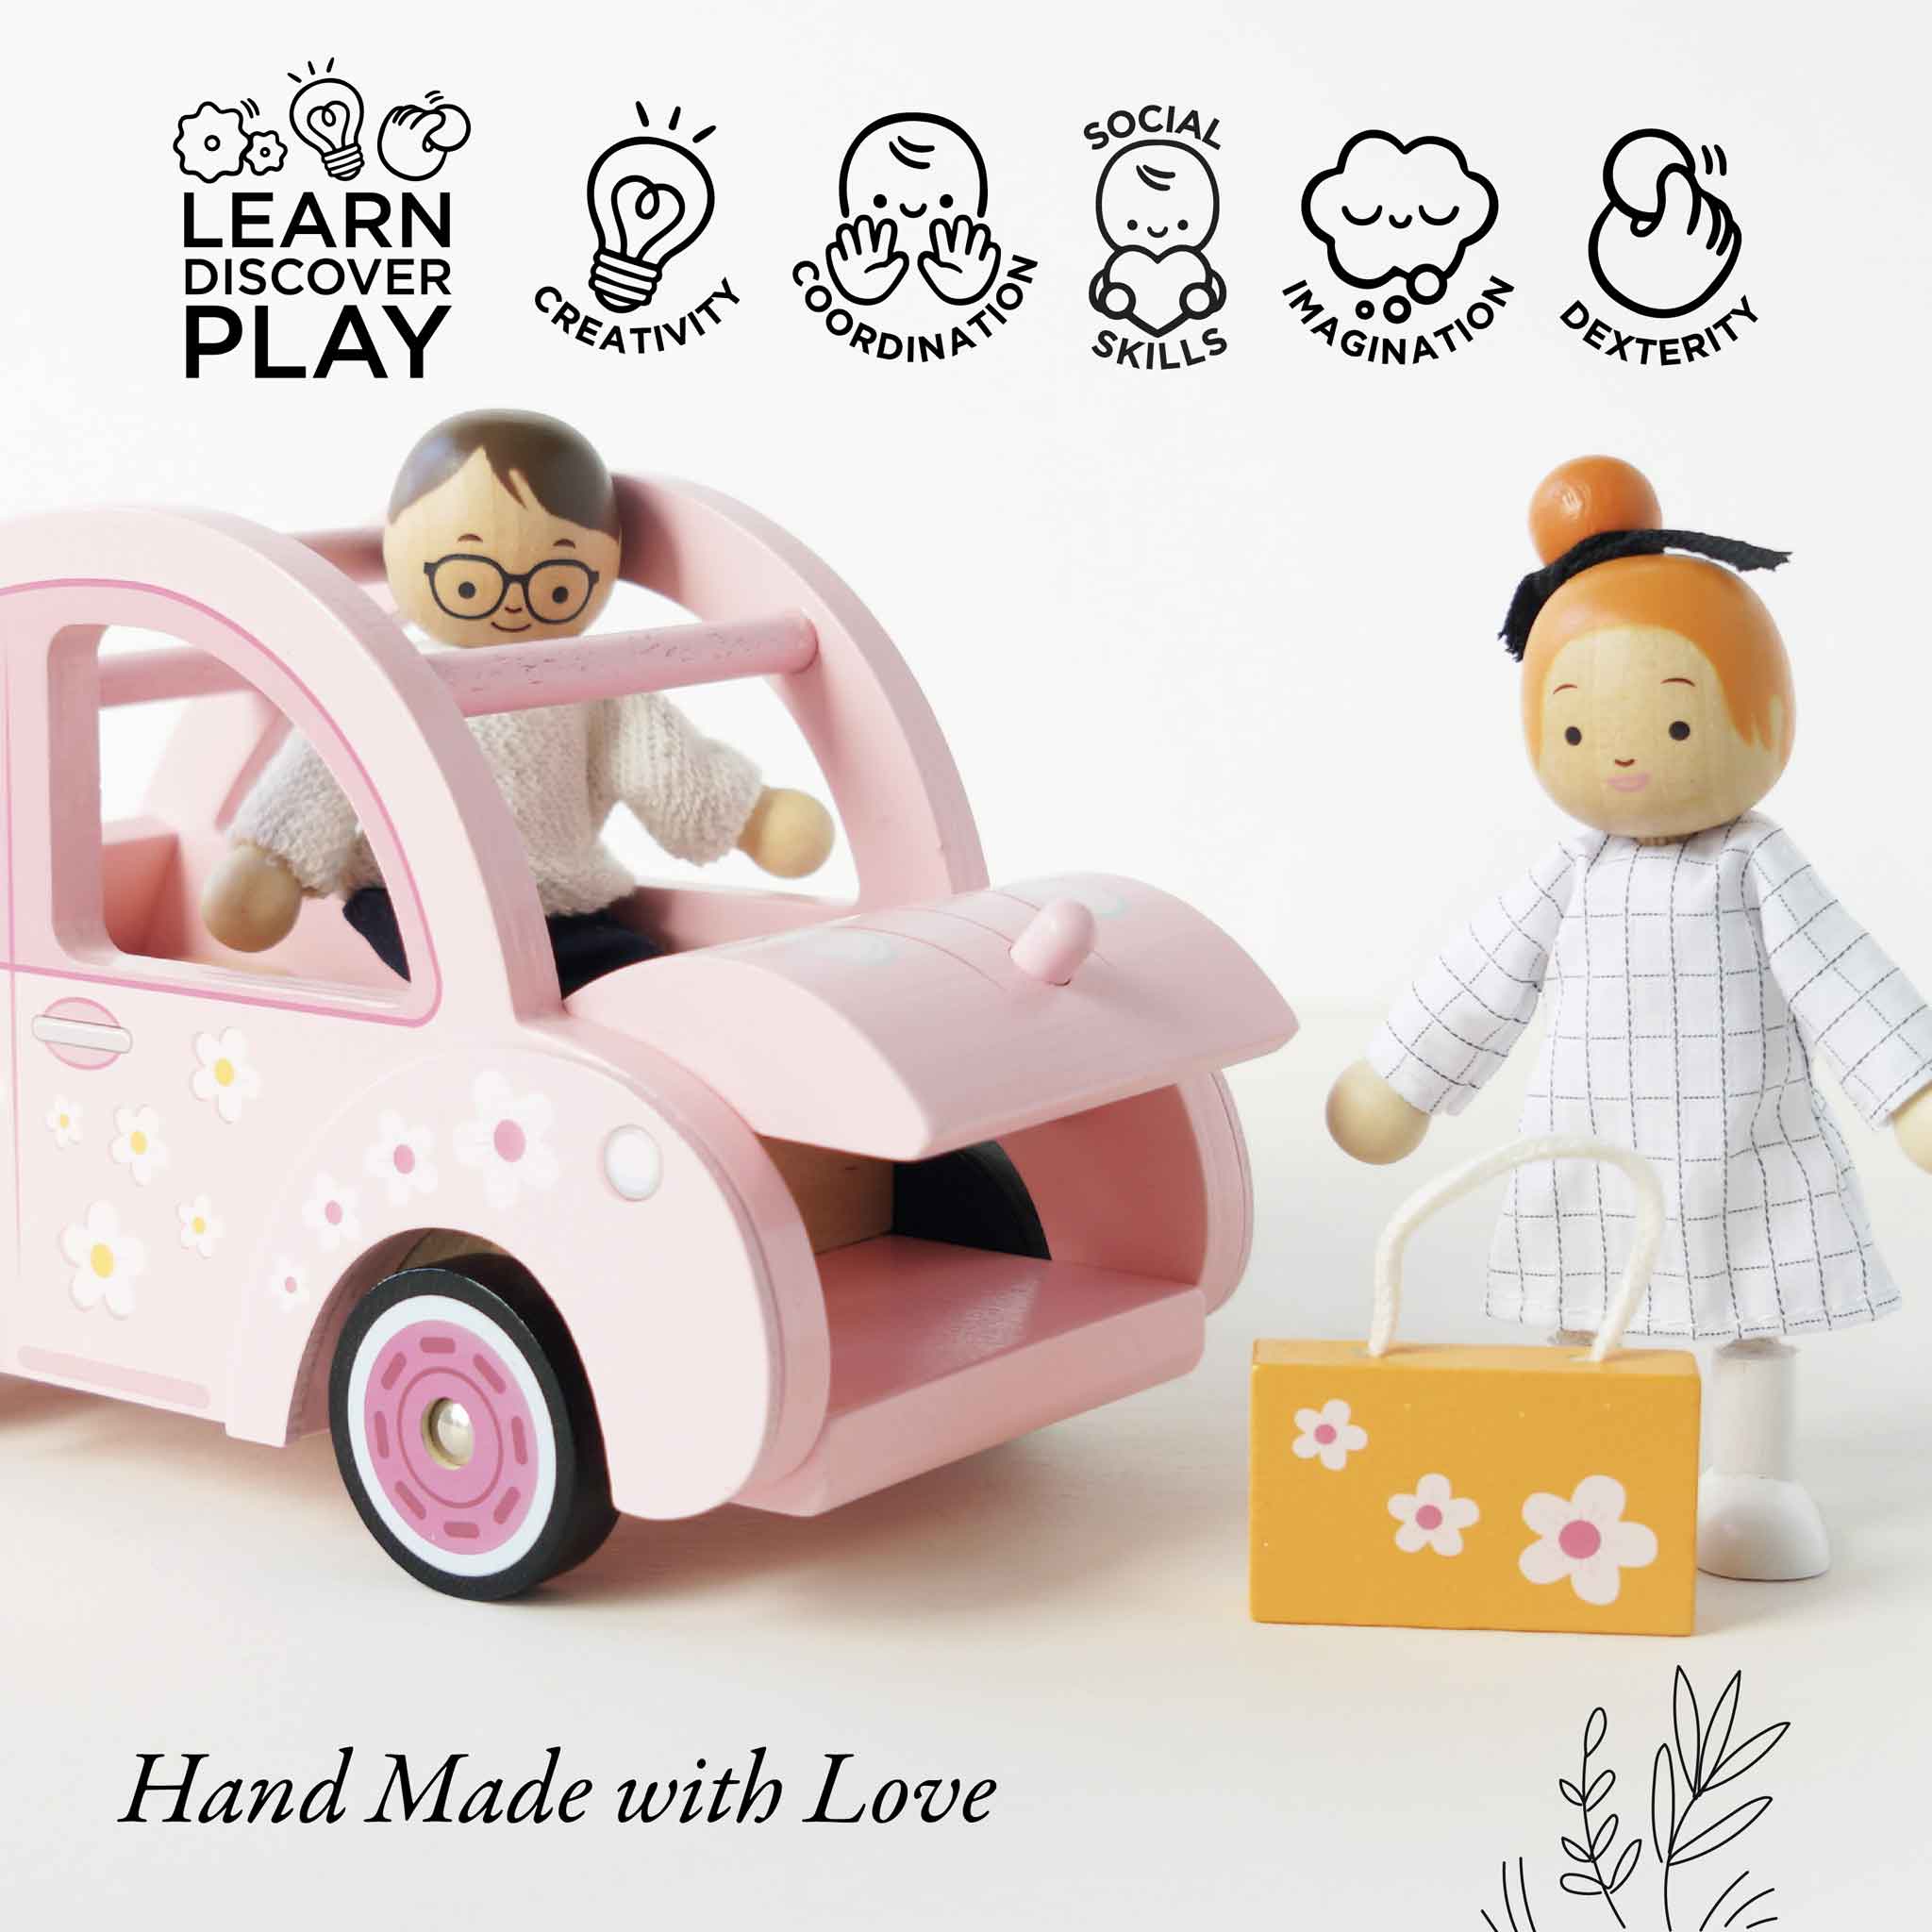 Sophie's Wooden Car Toy